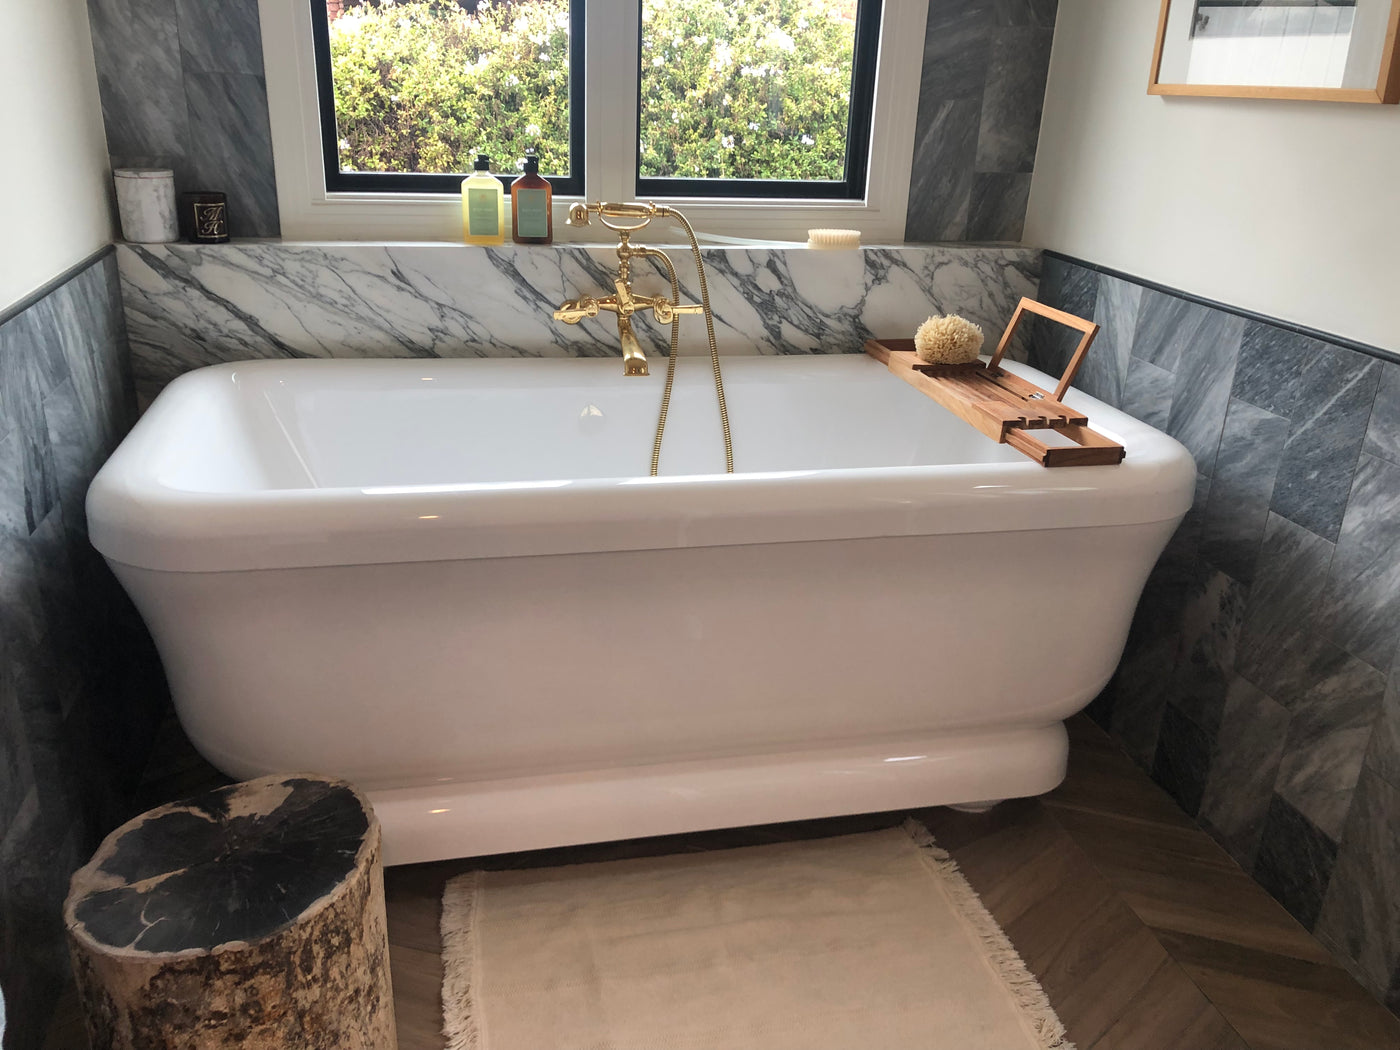 Easy and Effective Bathtub Cleaning Tips for a Spotless Tub